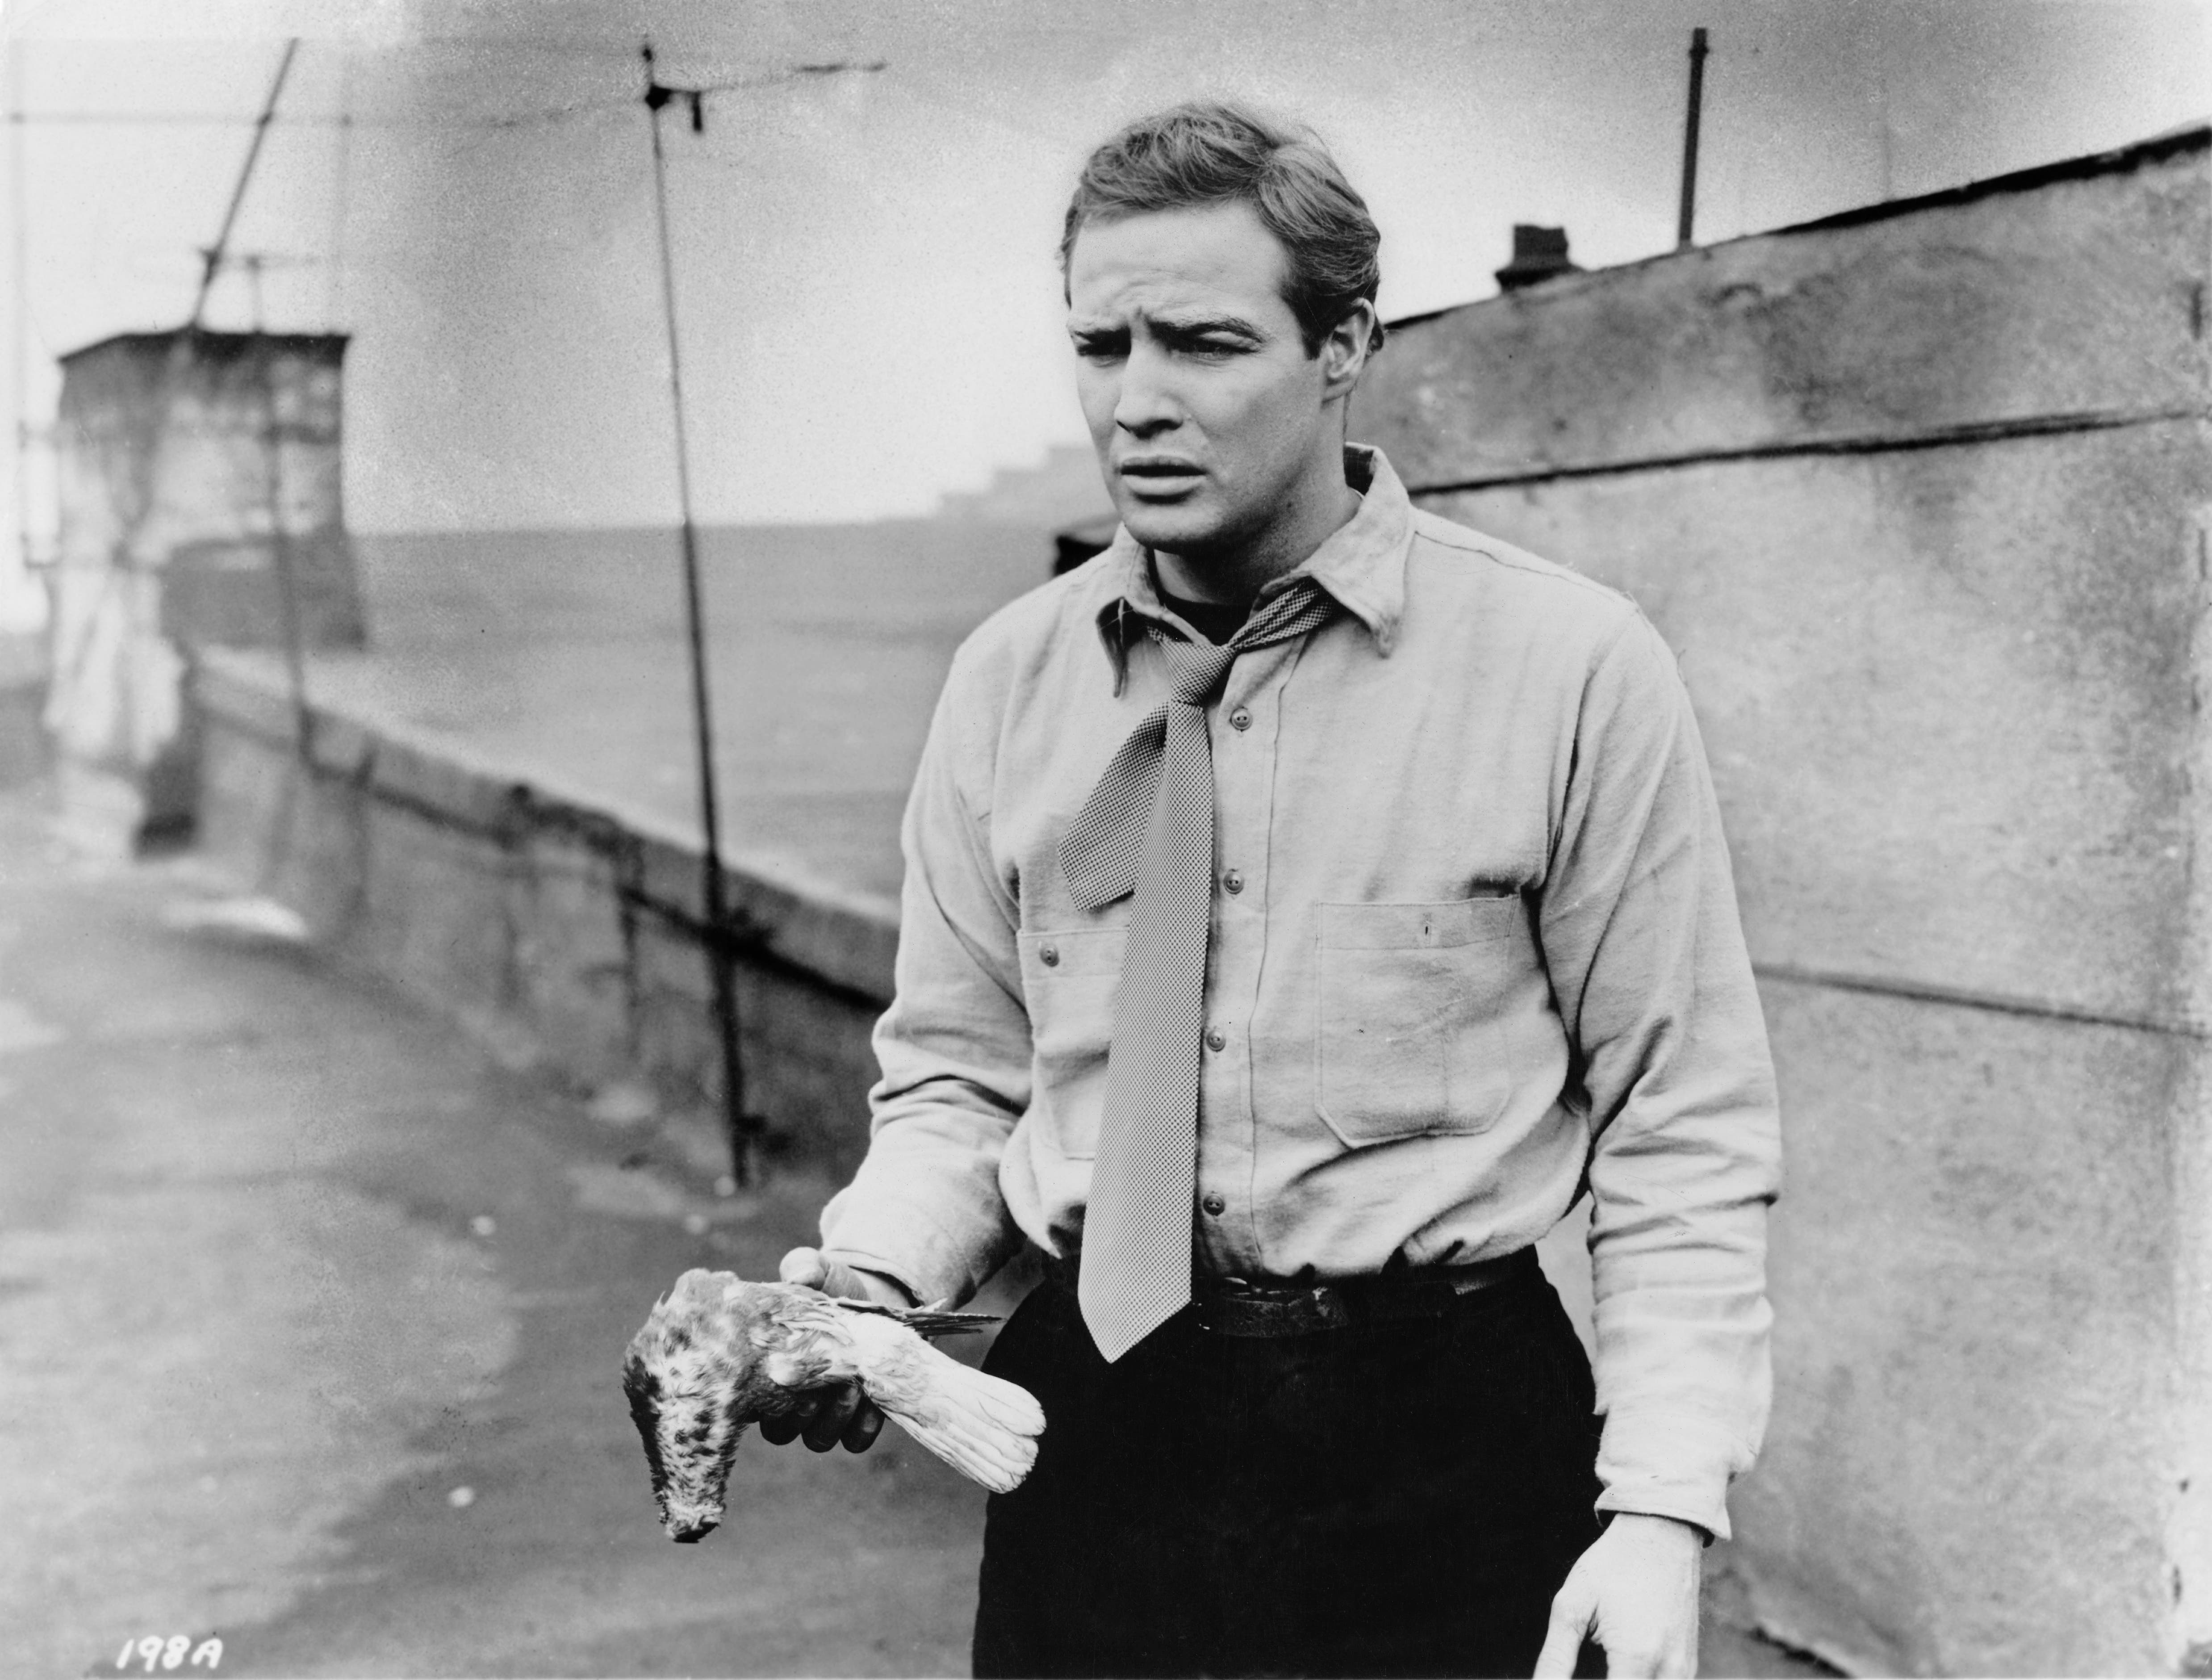 On this day in history, July 28, 1954, Oscar-winning film 'On the Waterfront' is released